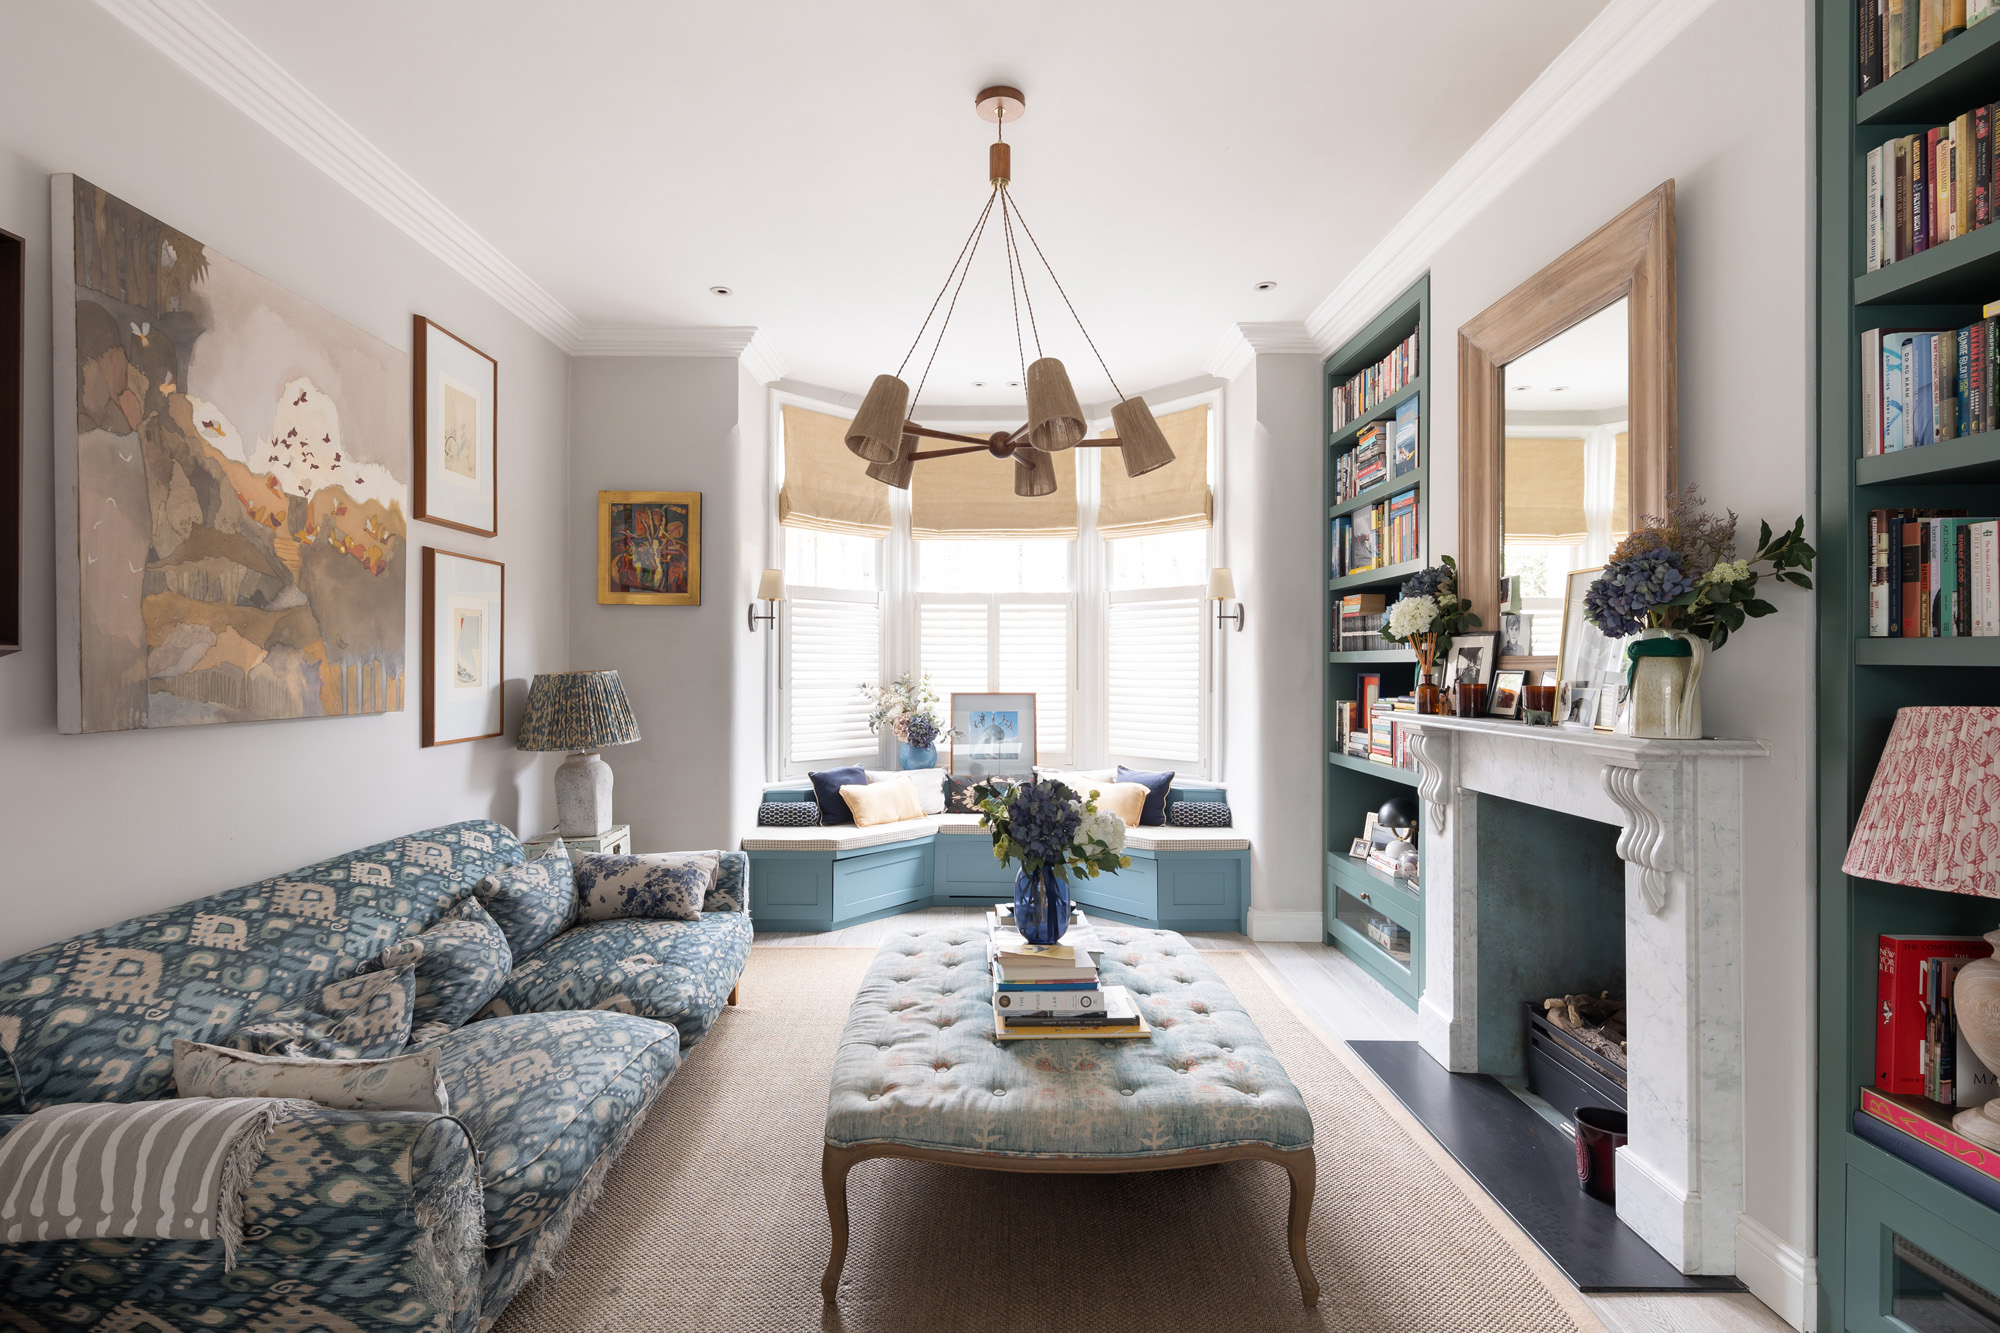 For Sale: Highlever Road North Kensington W10 open-plan kitchen and dining room with blue joinery and bay window